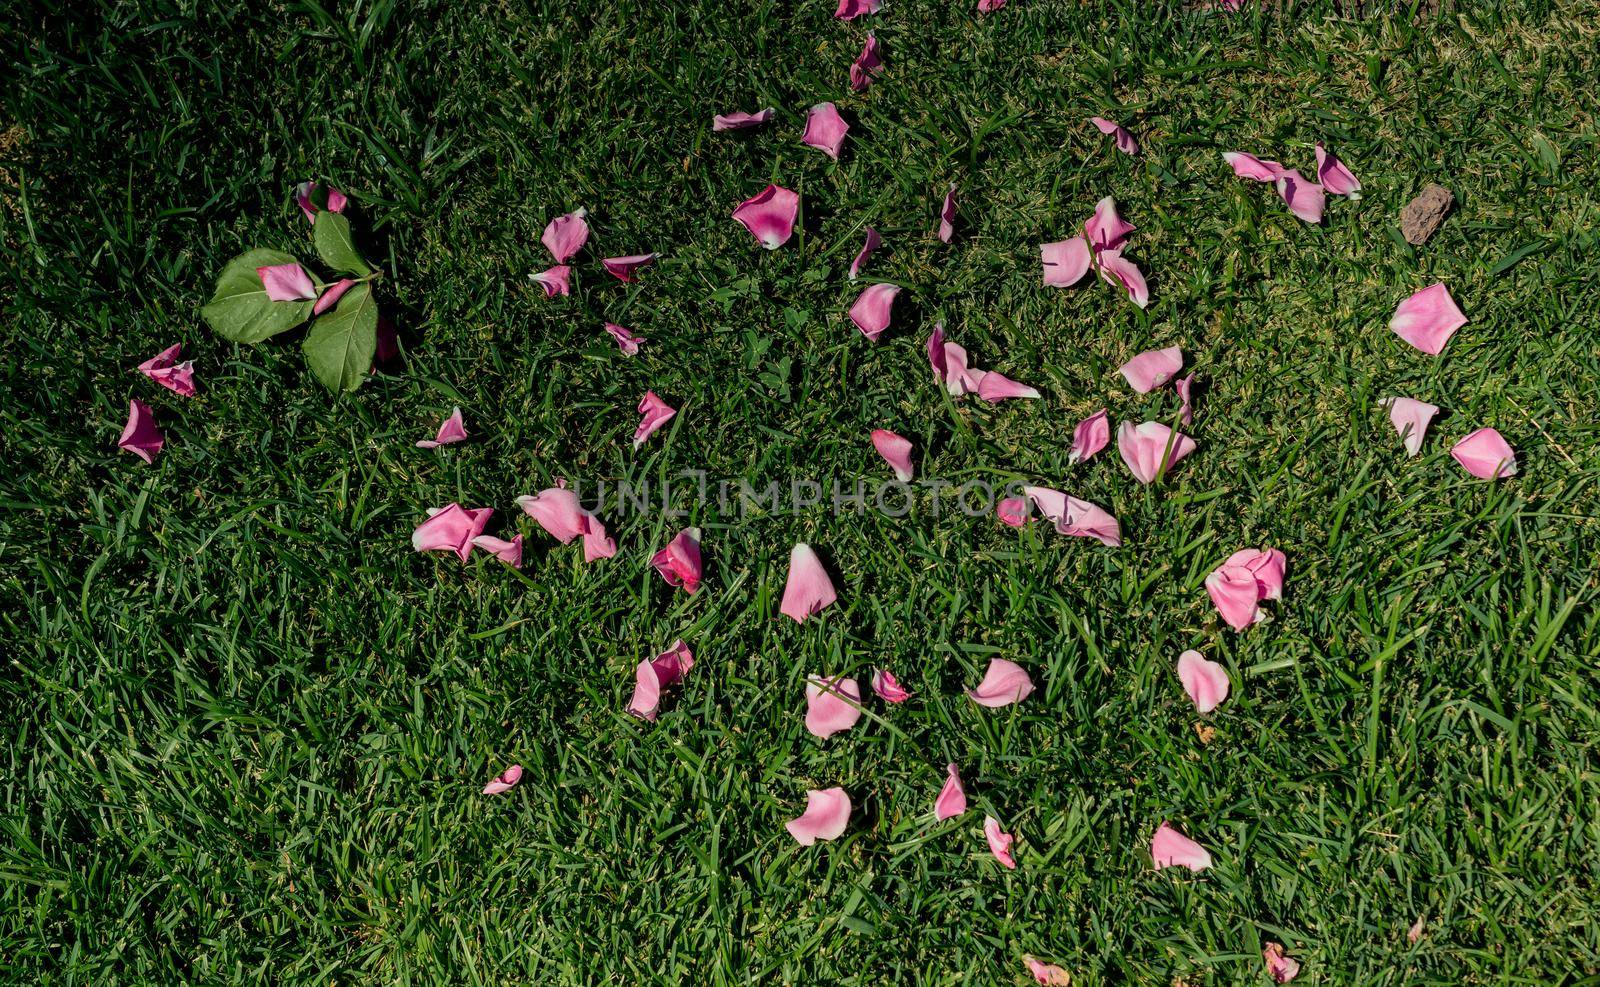 Rose petals in view representing love and romance